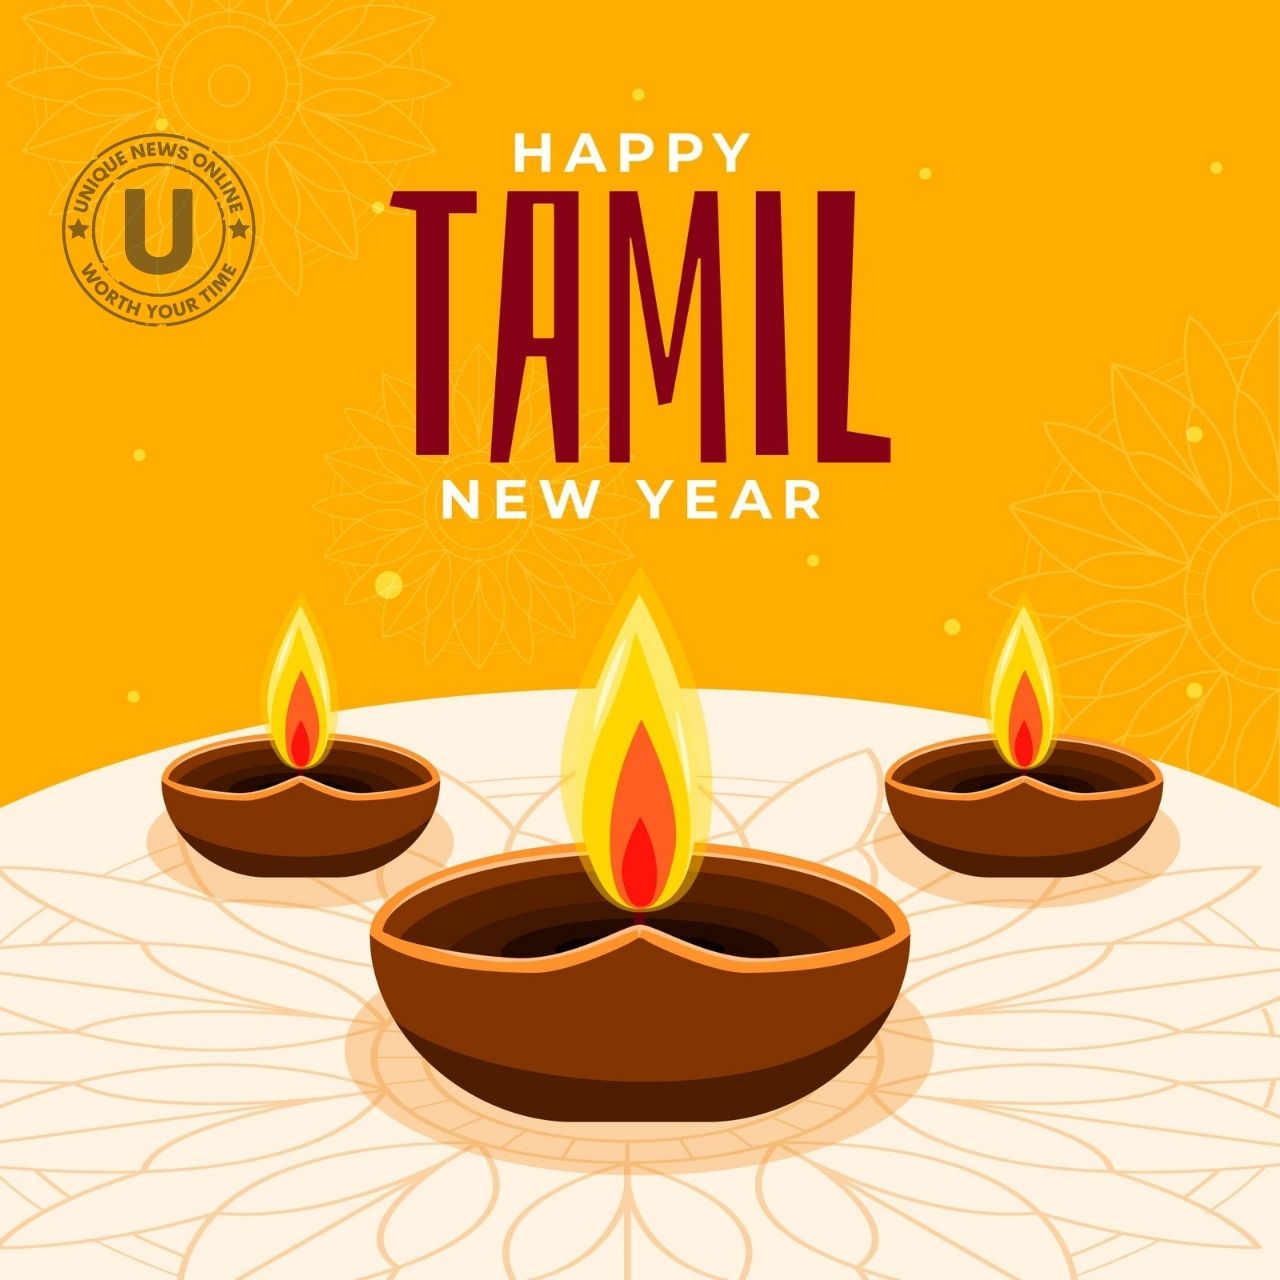 Happy Tamil New Year 2022: Quotes, Greetings, Images, Messages, Posters To Greet Your Loved Ones